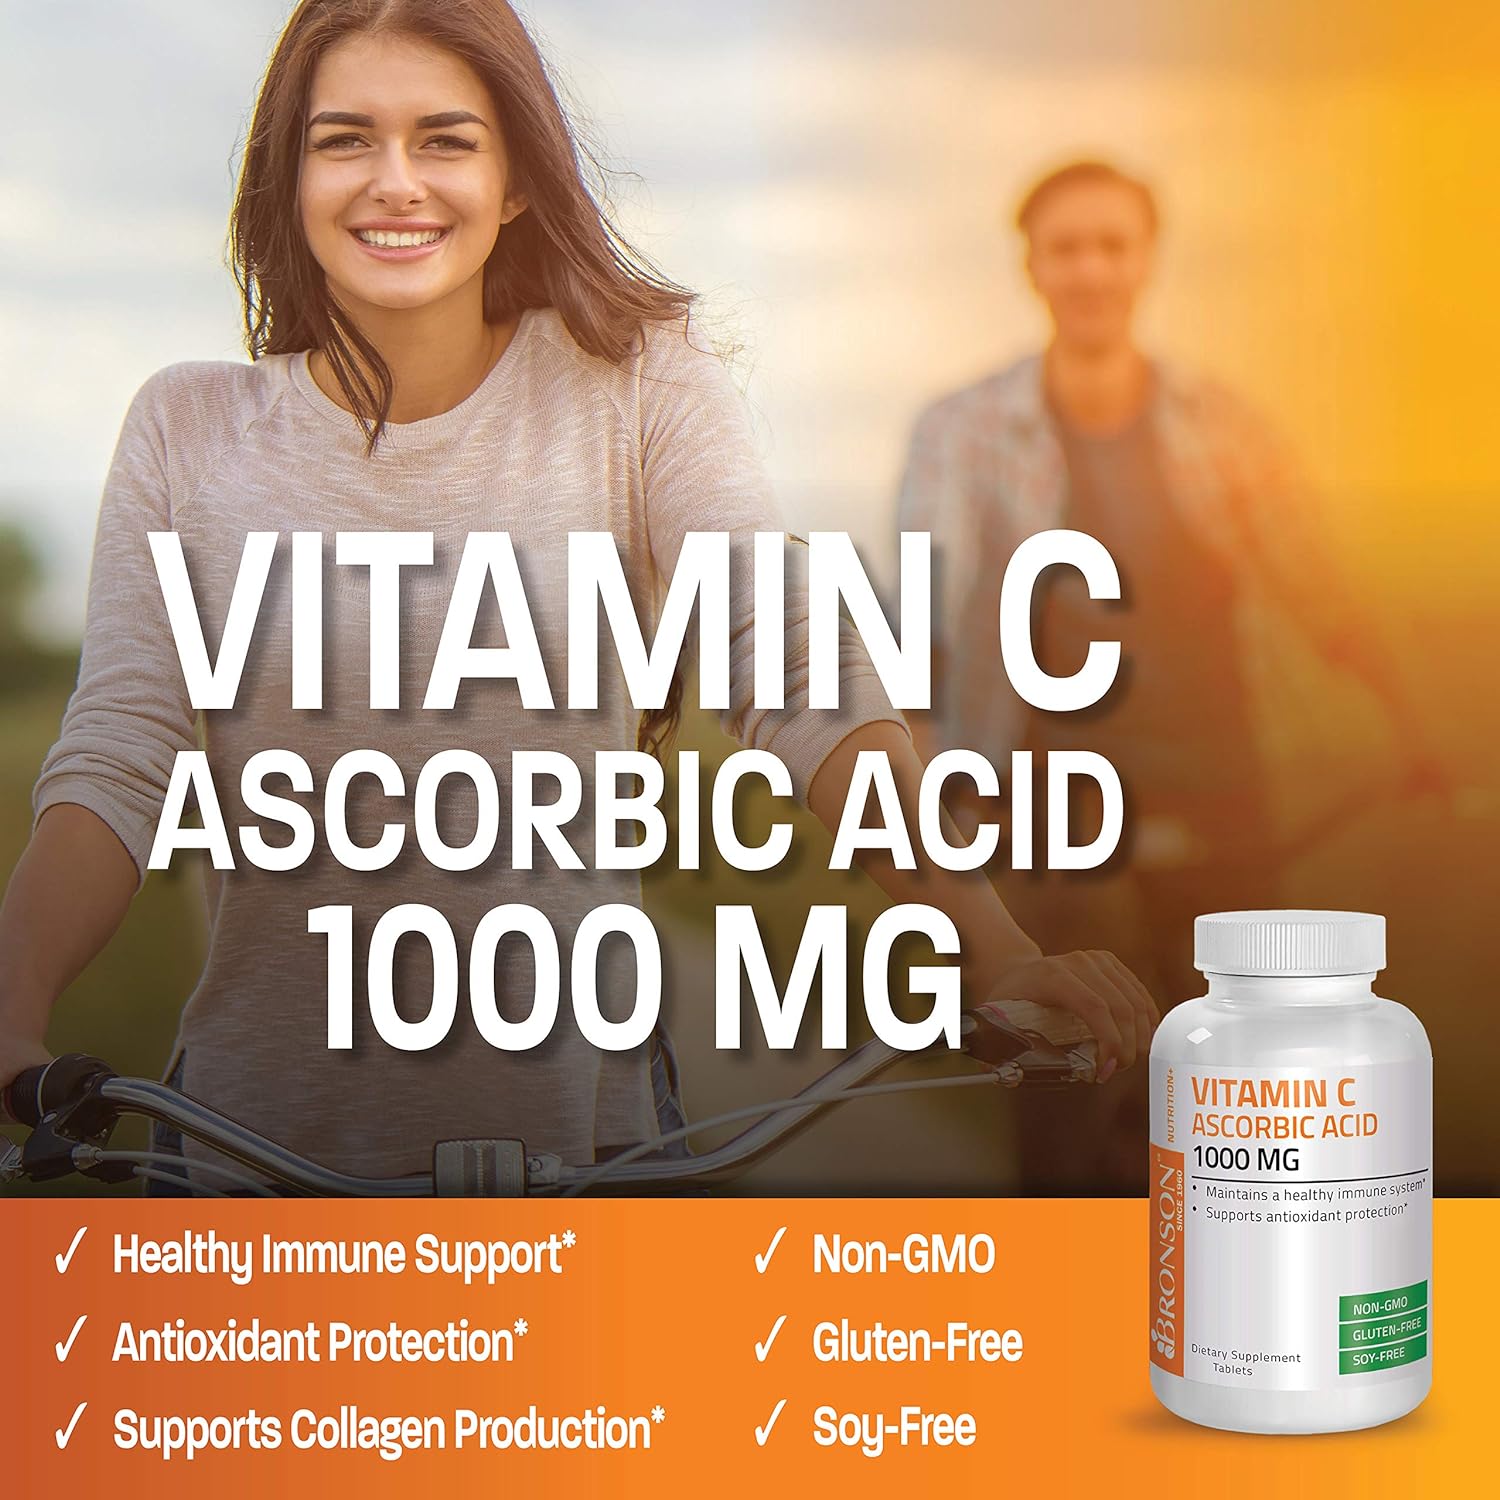 Vitamin C 1000 mg Premium Non-GMO Ascorbic Acid - Maintains Healthy Immune System, Supports Antioxidant Protection - 100 Tablets : Health & Household